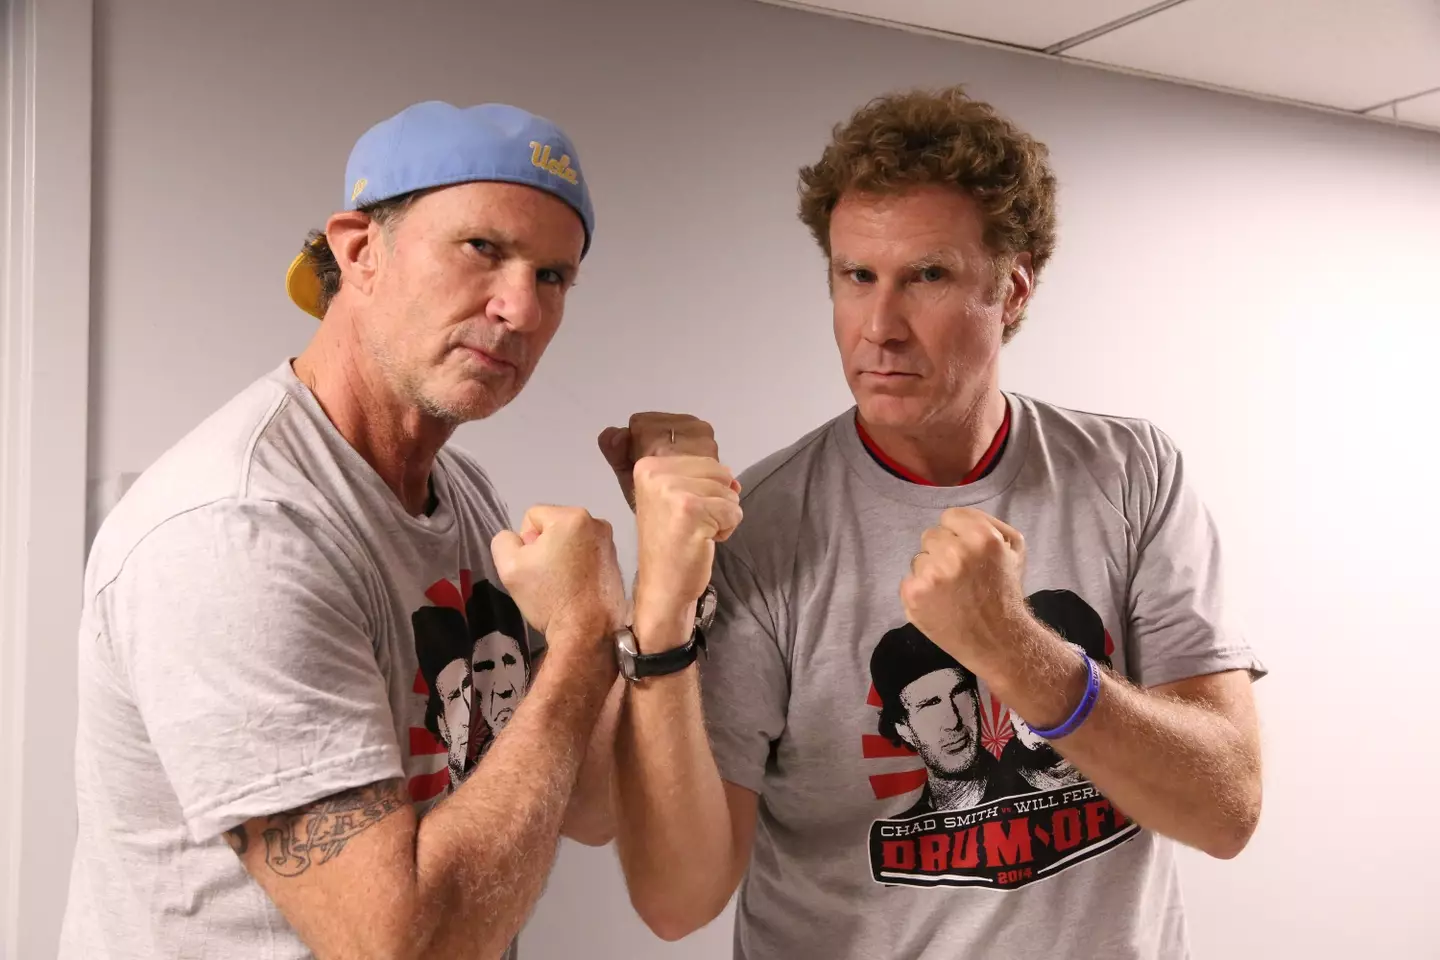 Ferrell and Chad Smith.